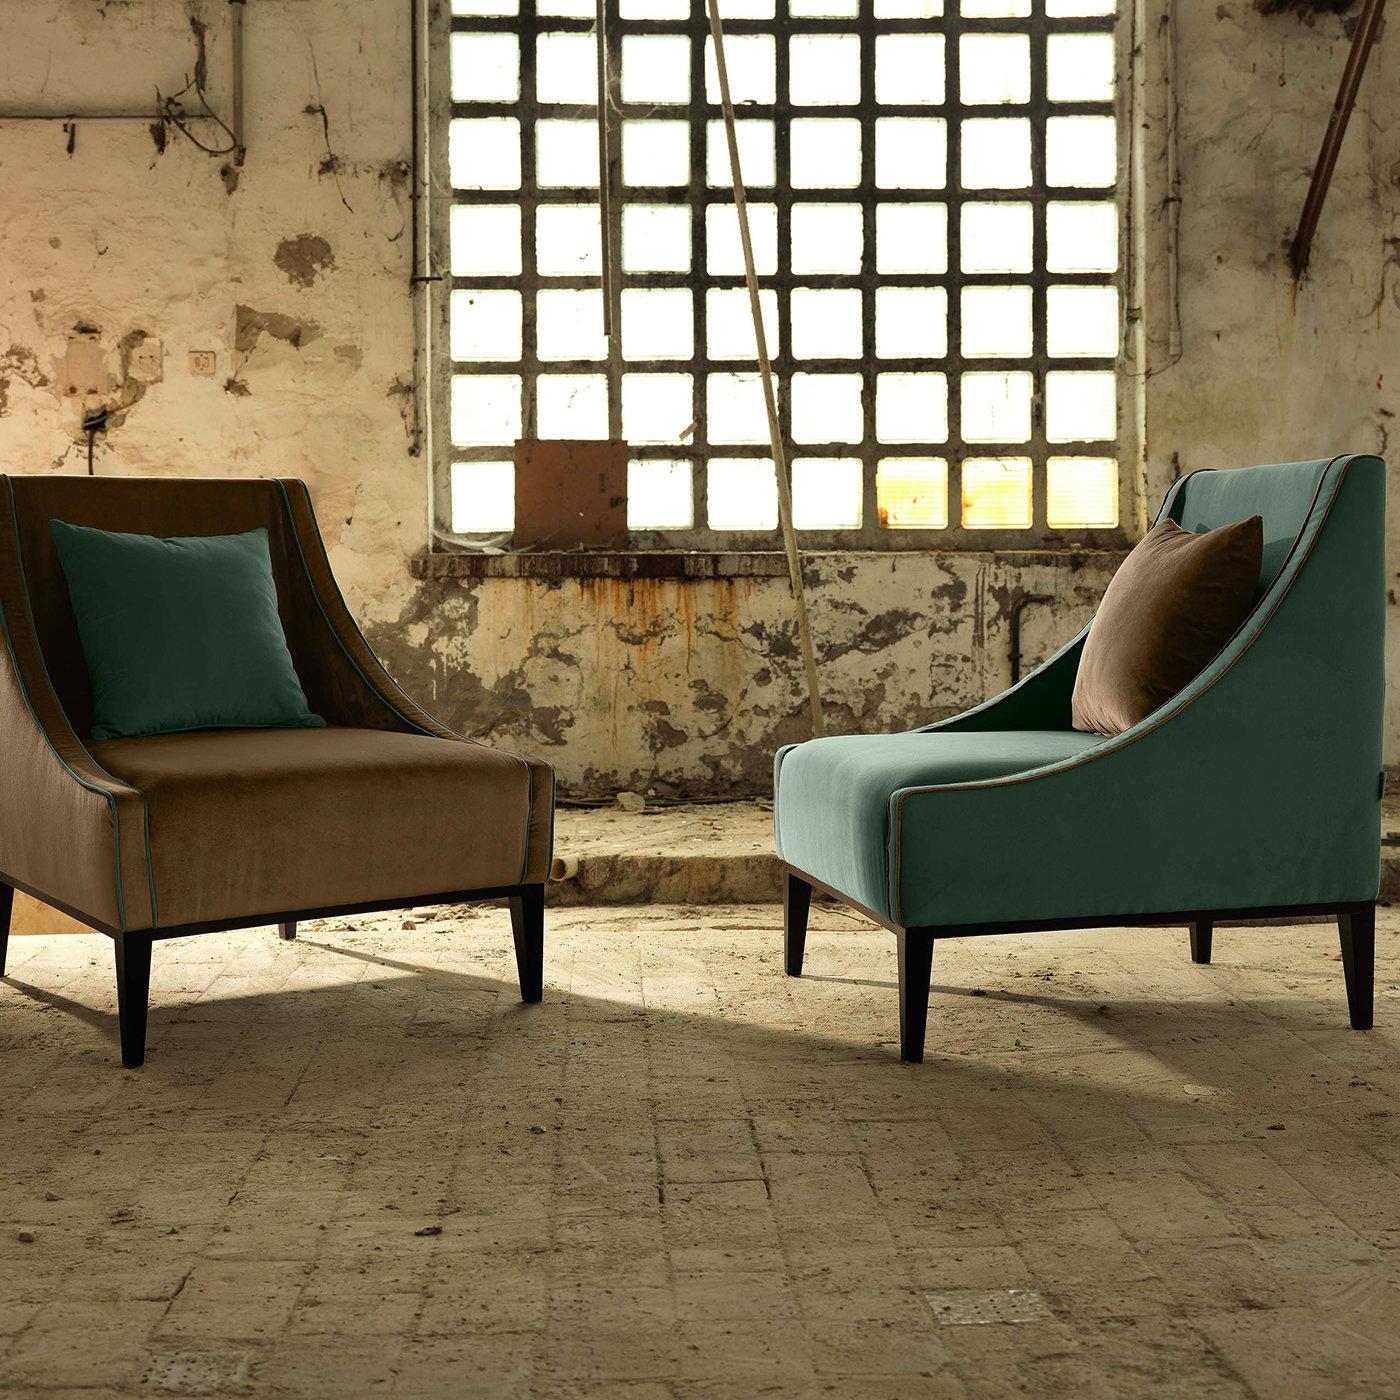 A simple design marked by square volumes, this sophisticated armchair has a retro allure, featuring distinctive armrests that curve gently to connect backrest and seat. Imbuing elegant comfort in any interior, the plywood frame with multi-density